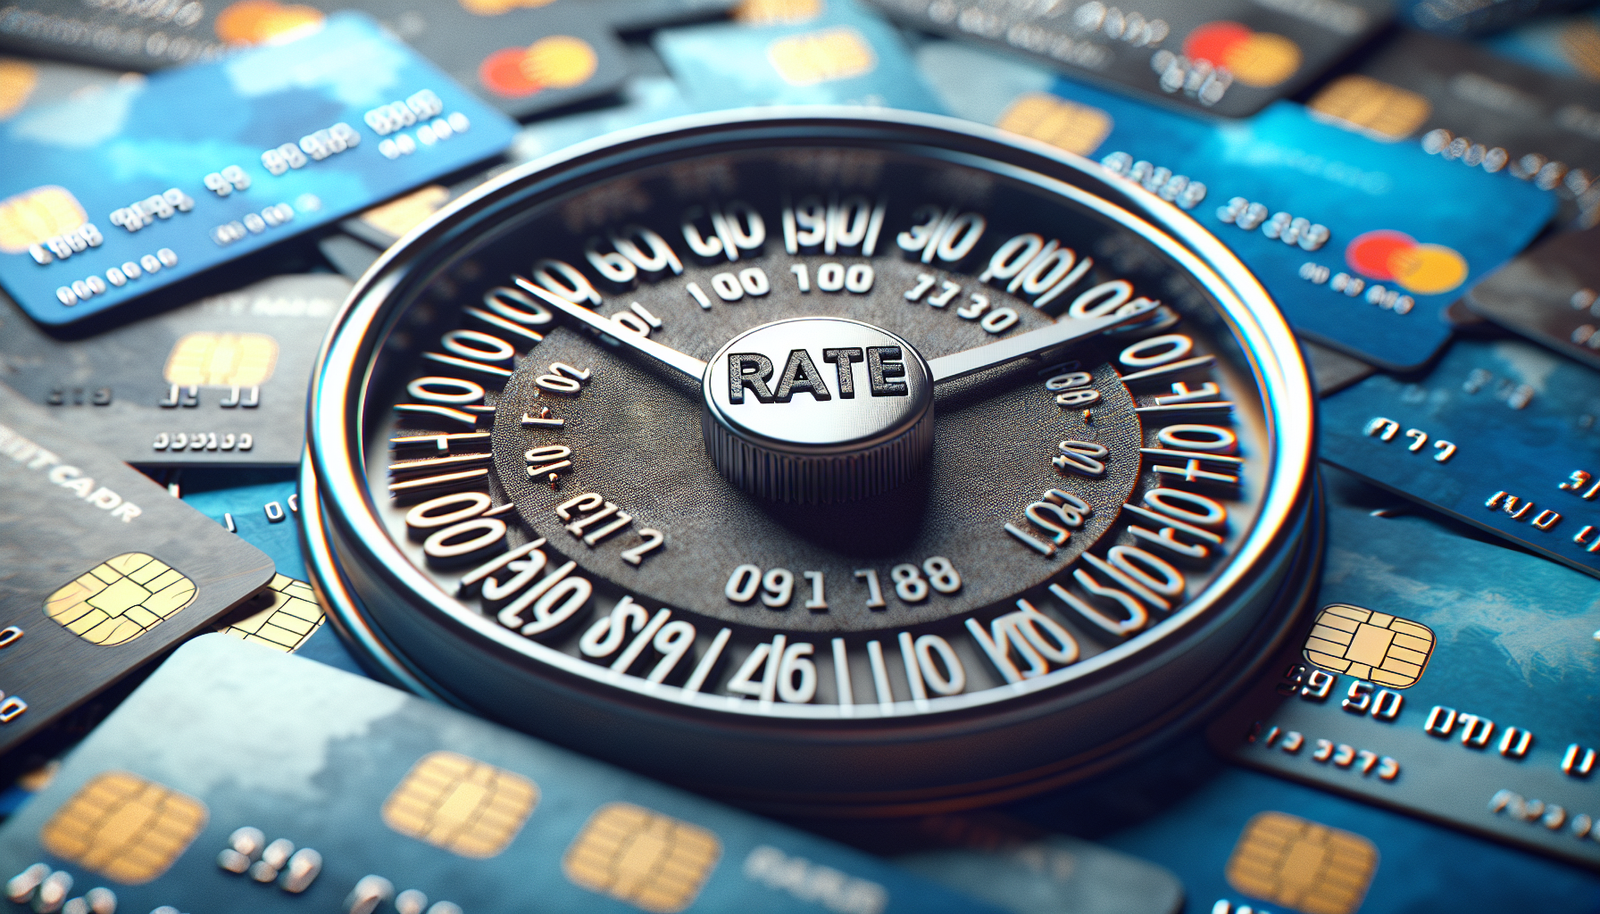 Variable Interest Rates: Credit Card Interest Rates Can Be Variable, Making It Challenging To Predict Future Costs.